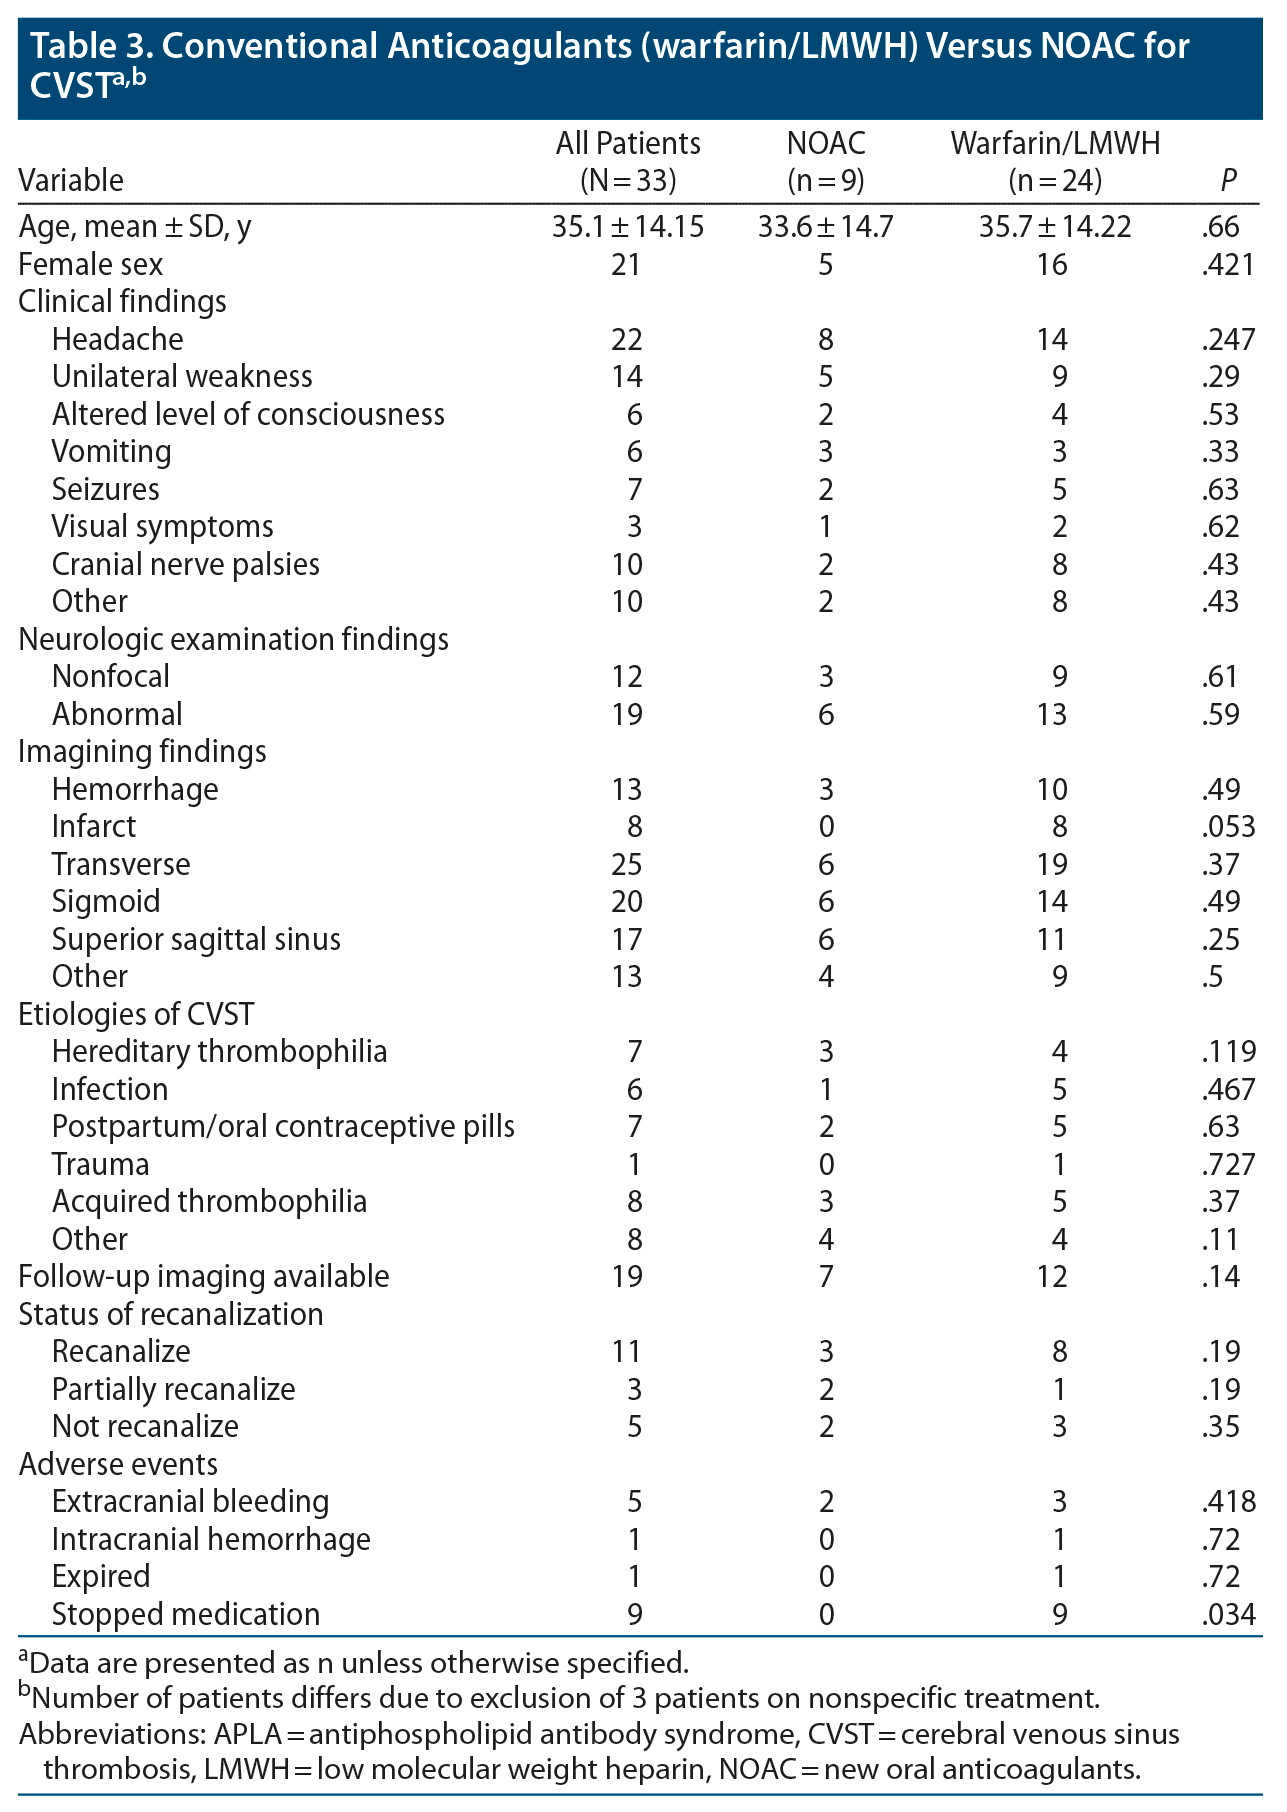 Comparison of adverse effects in both groups.